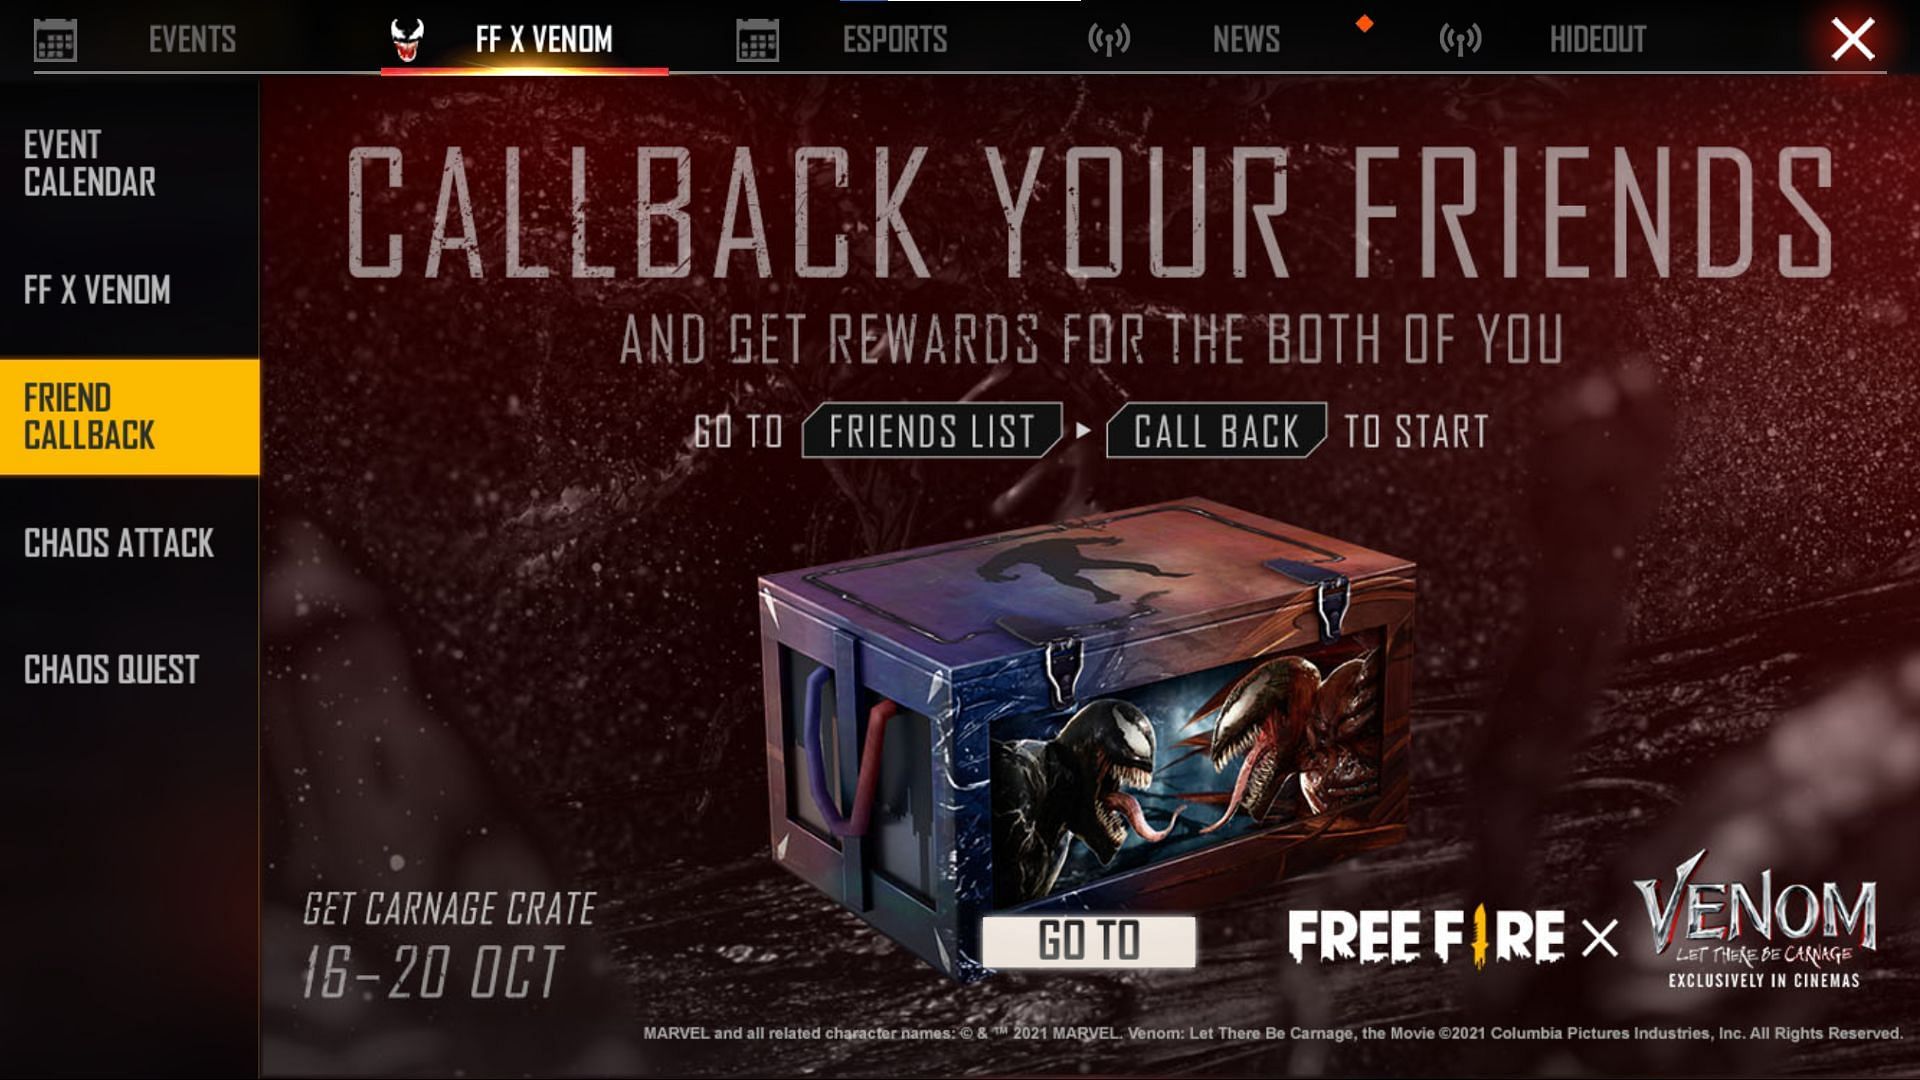 The Callback event provides free rewards for inviting inactive friends (Image via Free Fire)